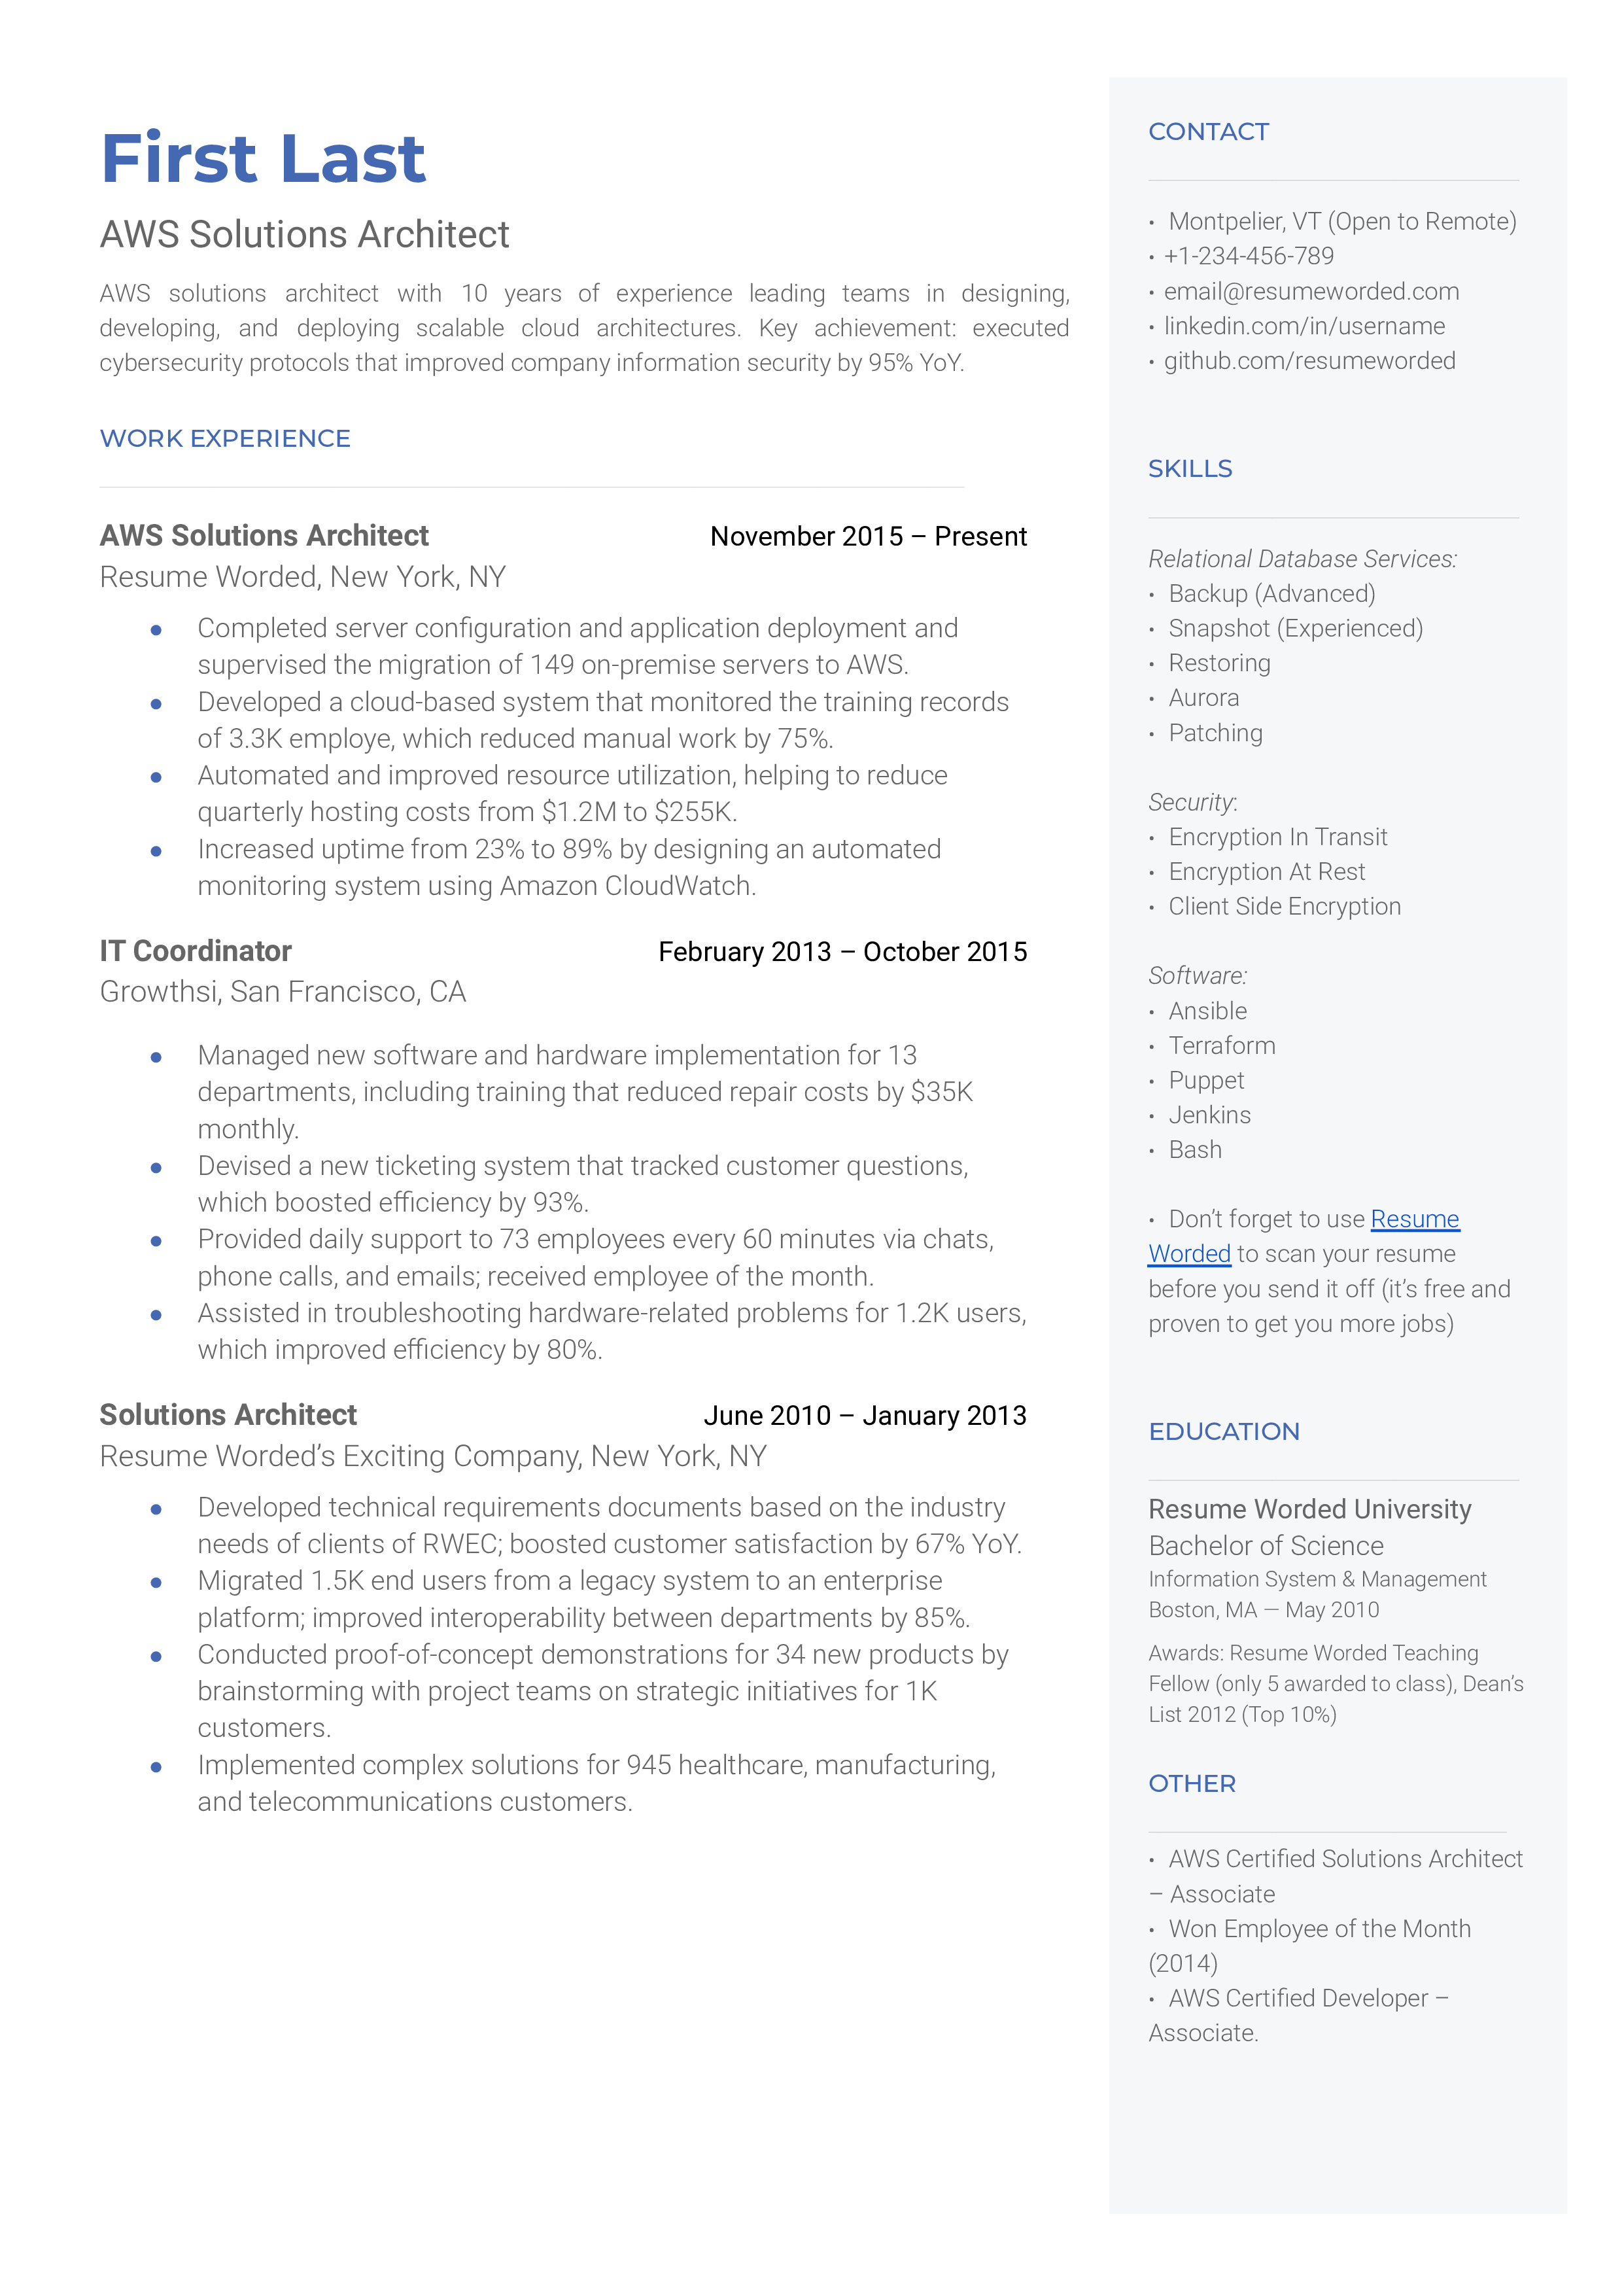 AWS Solutions Architect Resume Sample